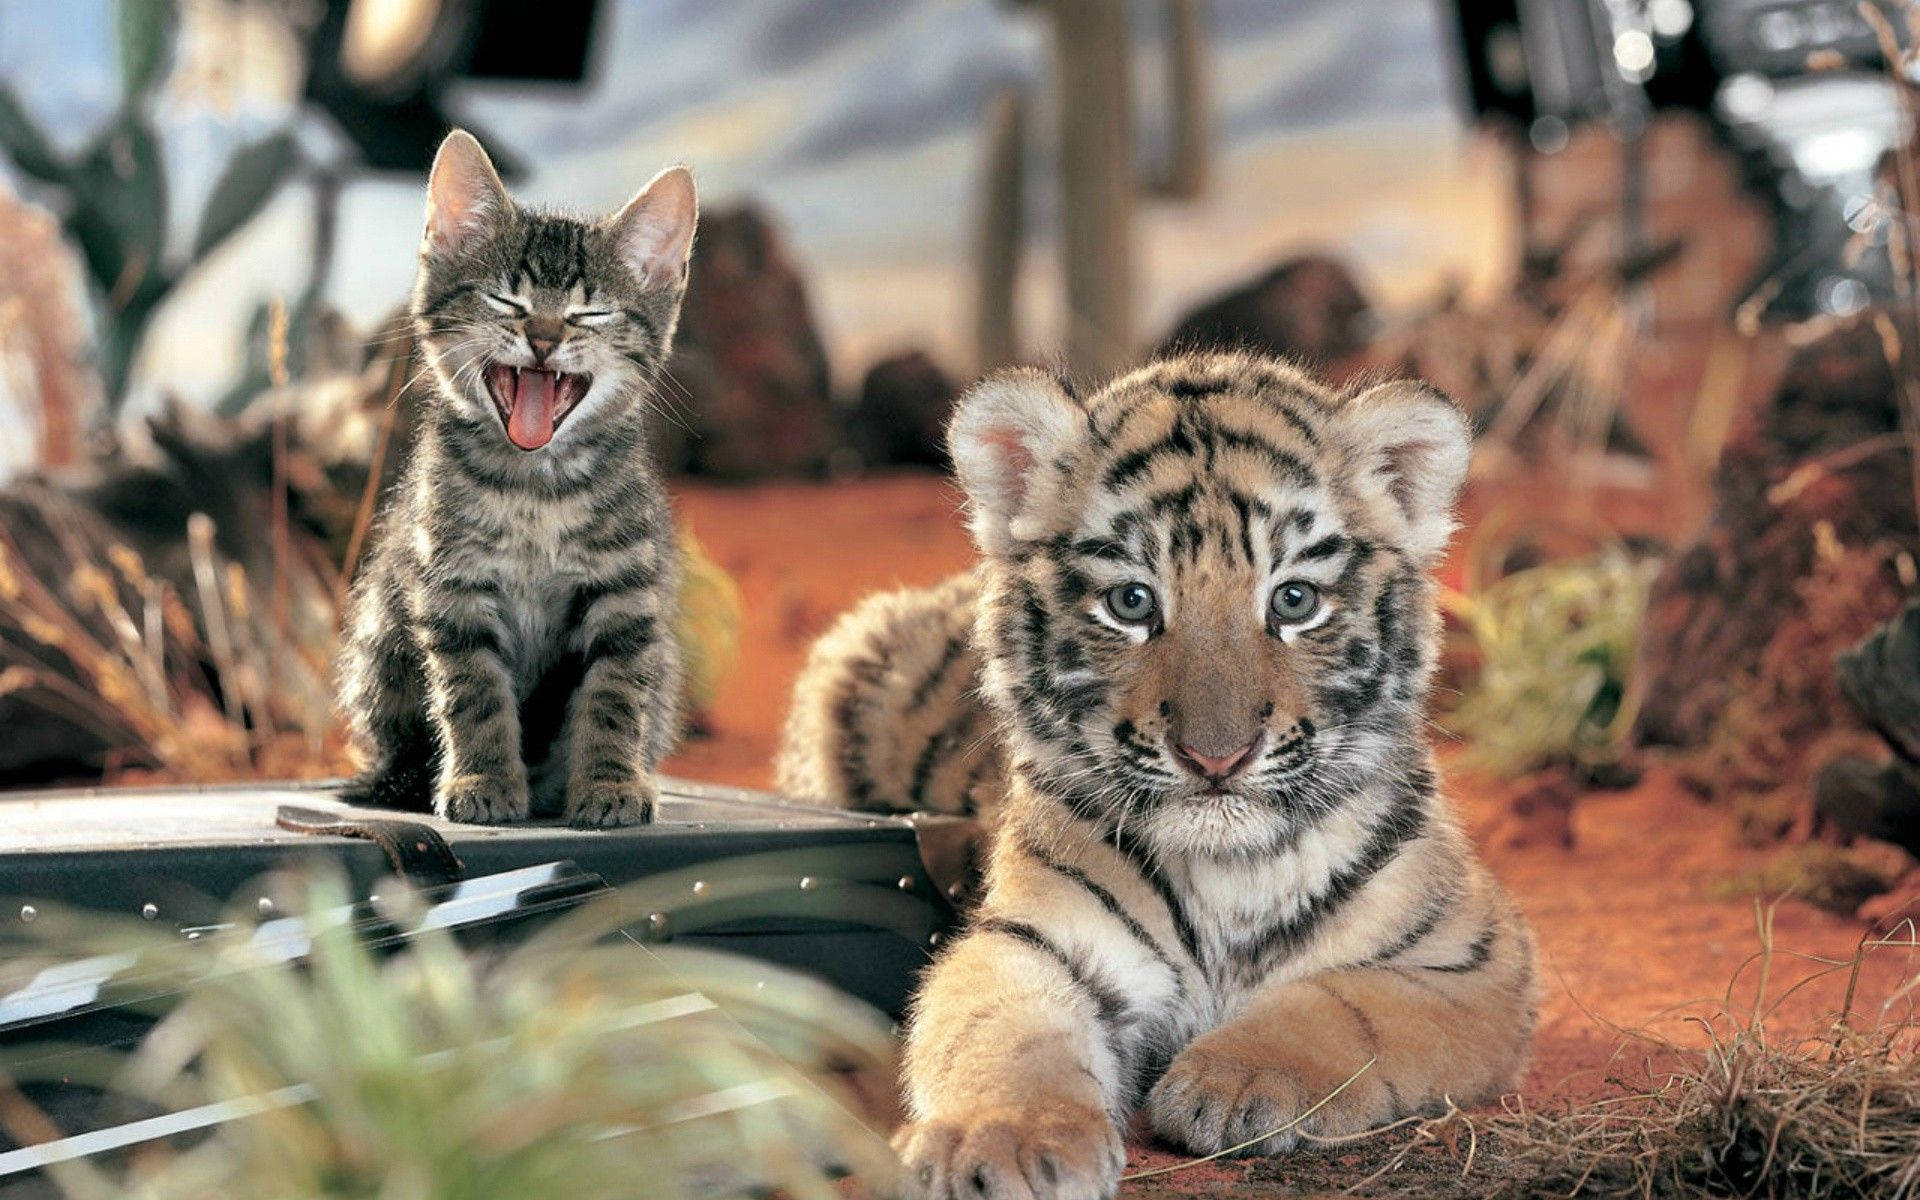 Baby Tiger And Kitten